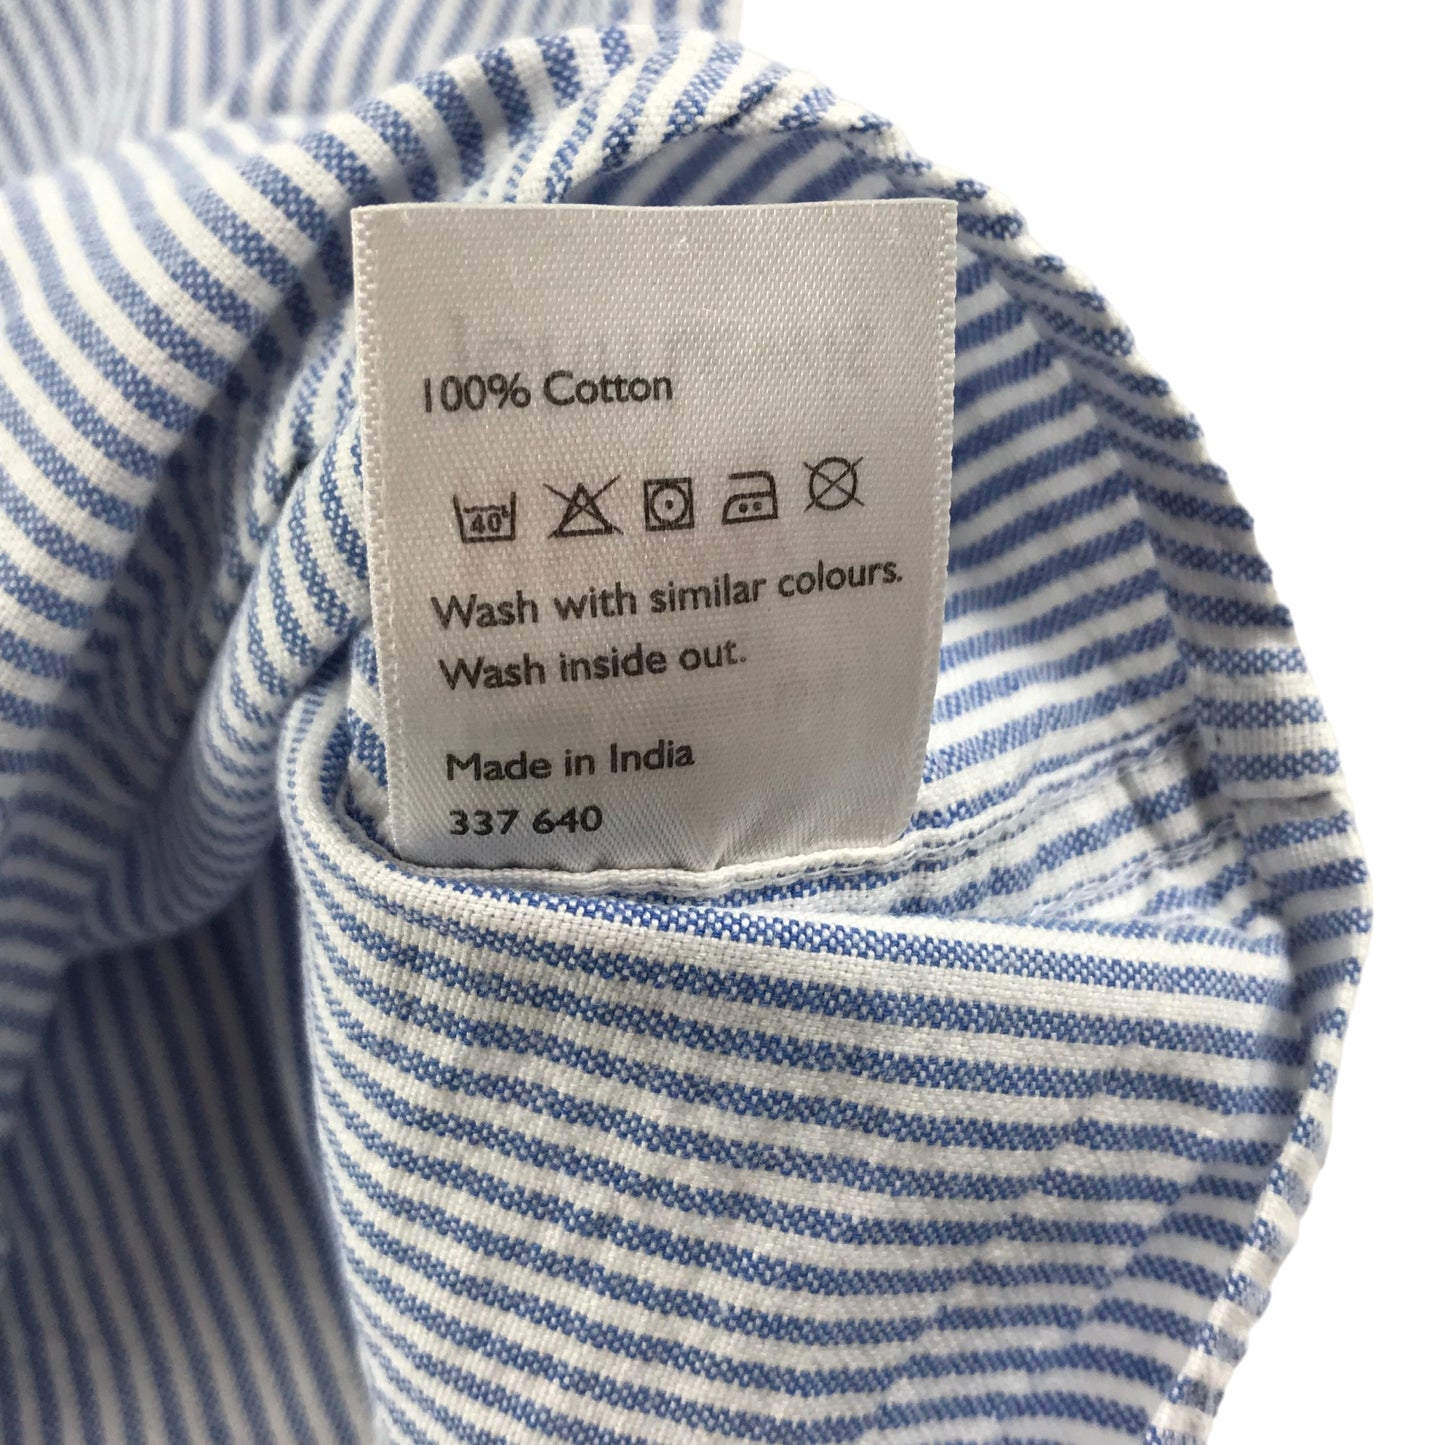 John Lewis Shirt Age 10 Blue White Stripy Heirloom Collection Long Sleeve Button Up Cotton